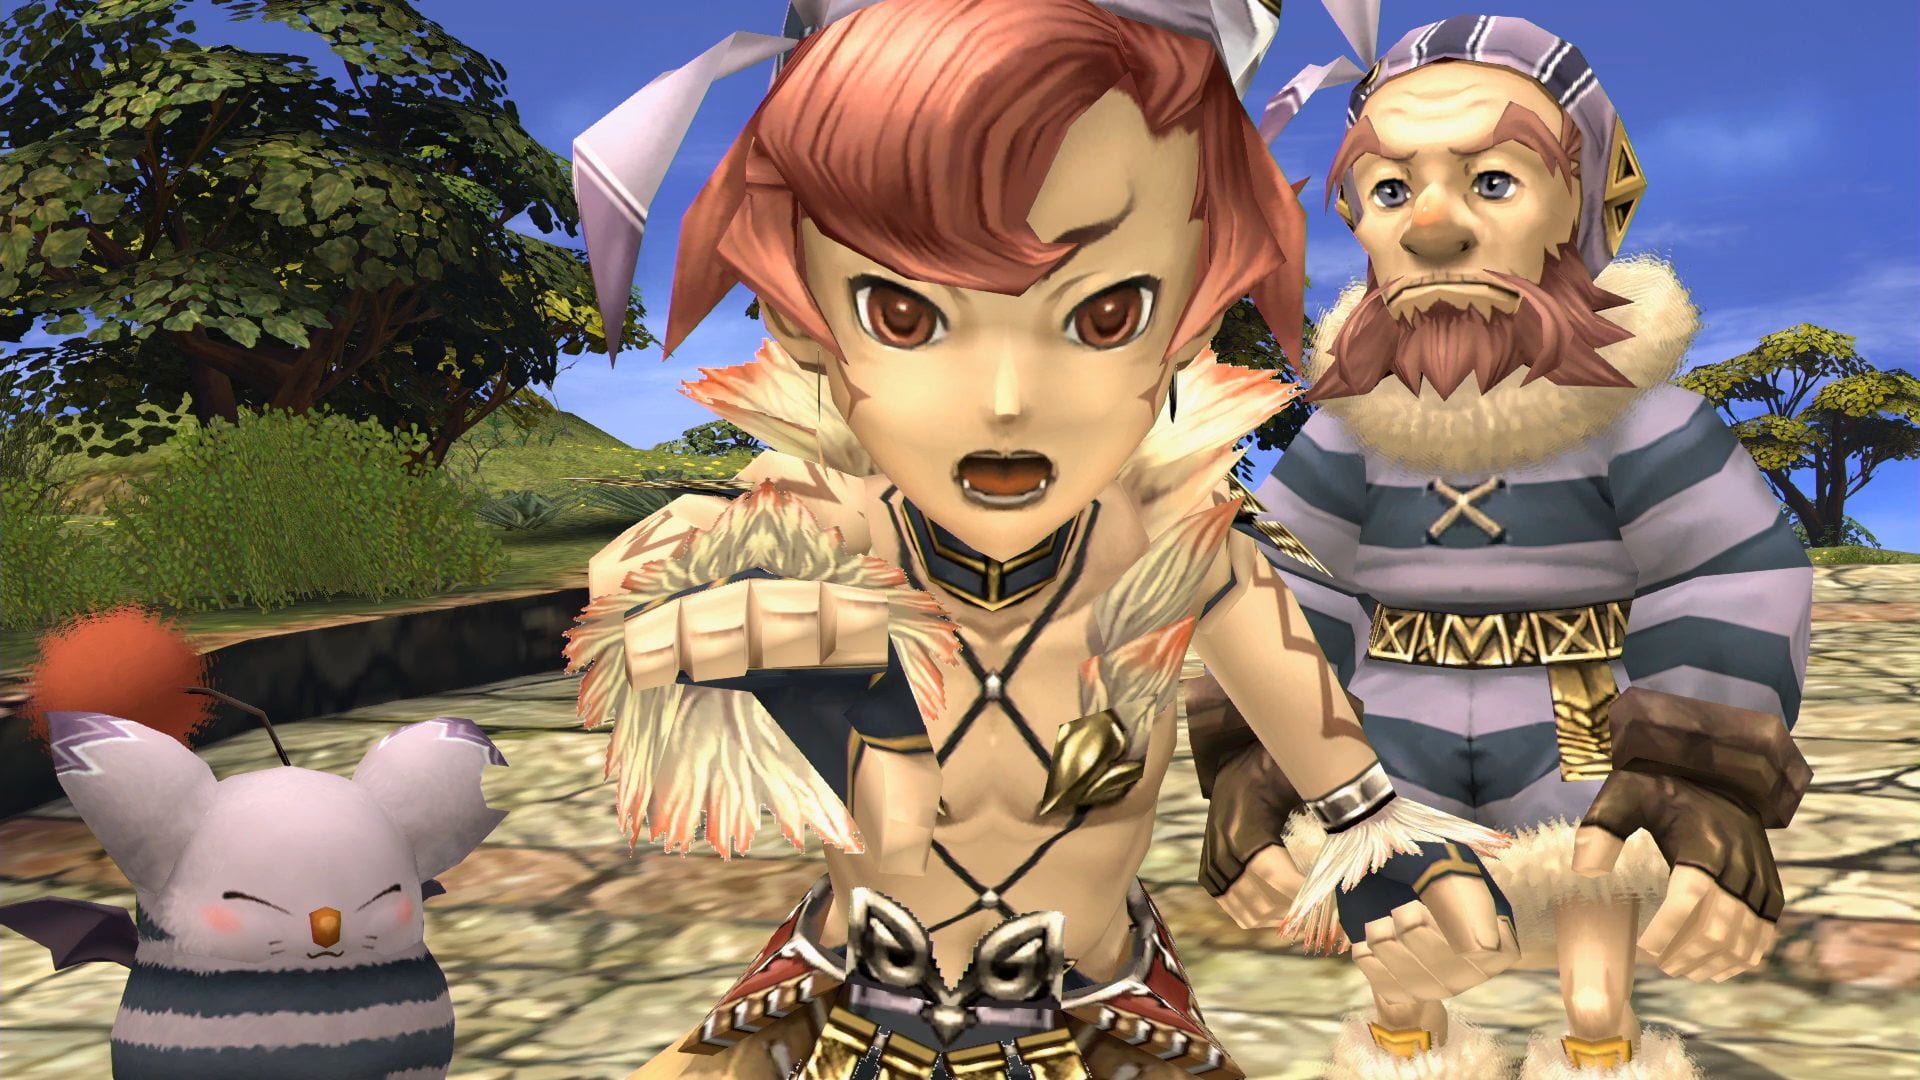 Final Fantasy Crystal Chronicles Remastered Edition Lite Free Demo Announced